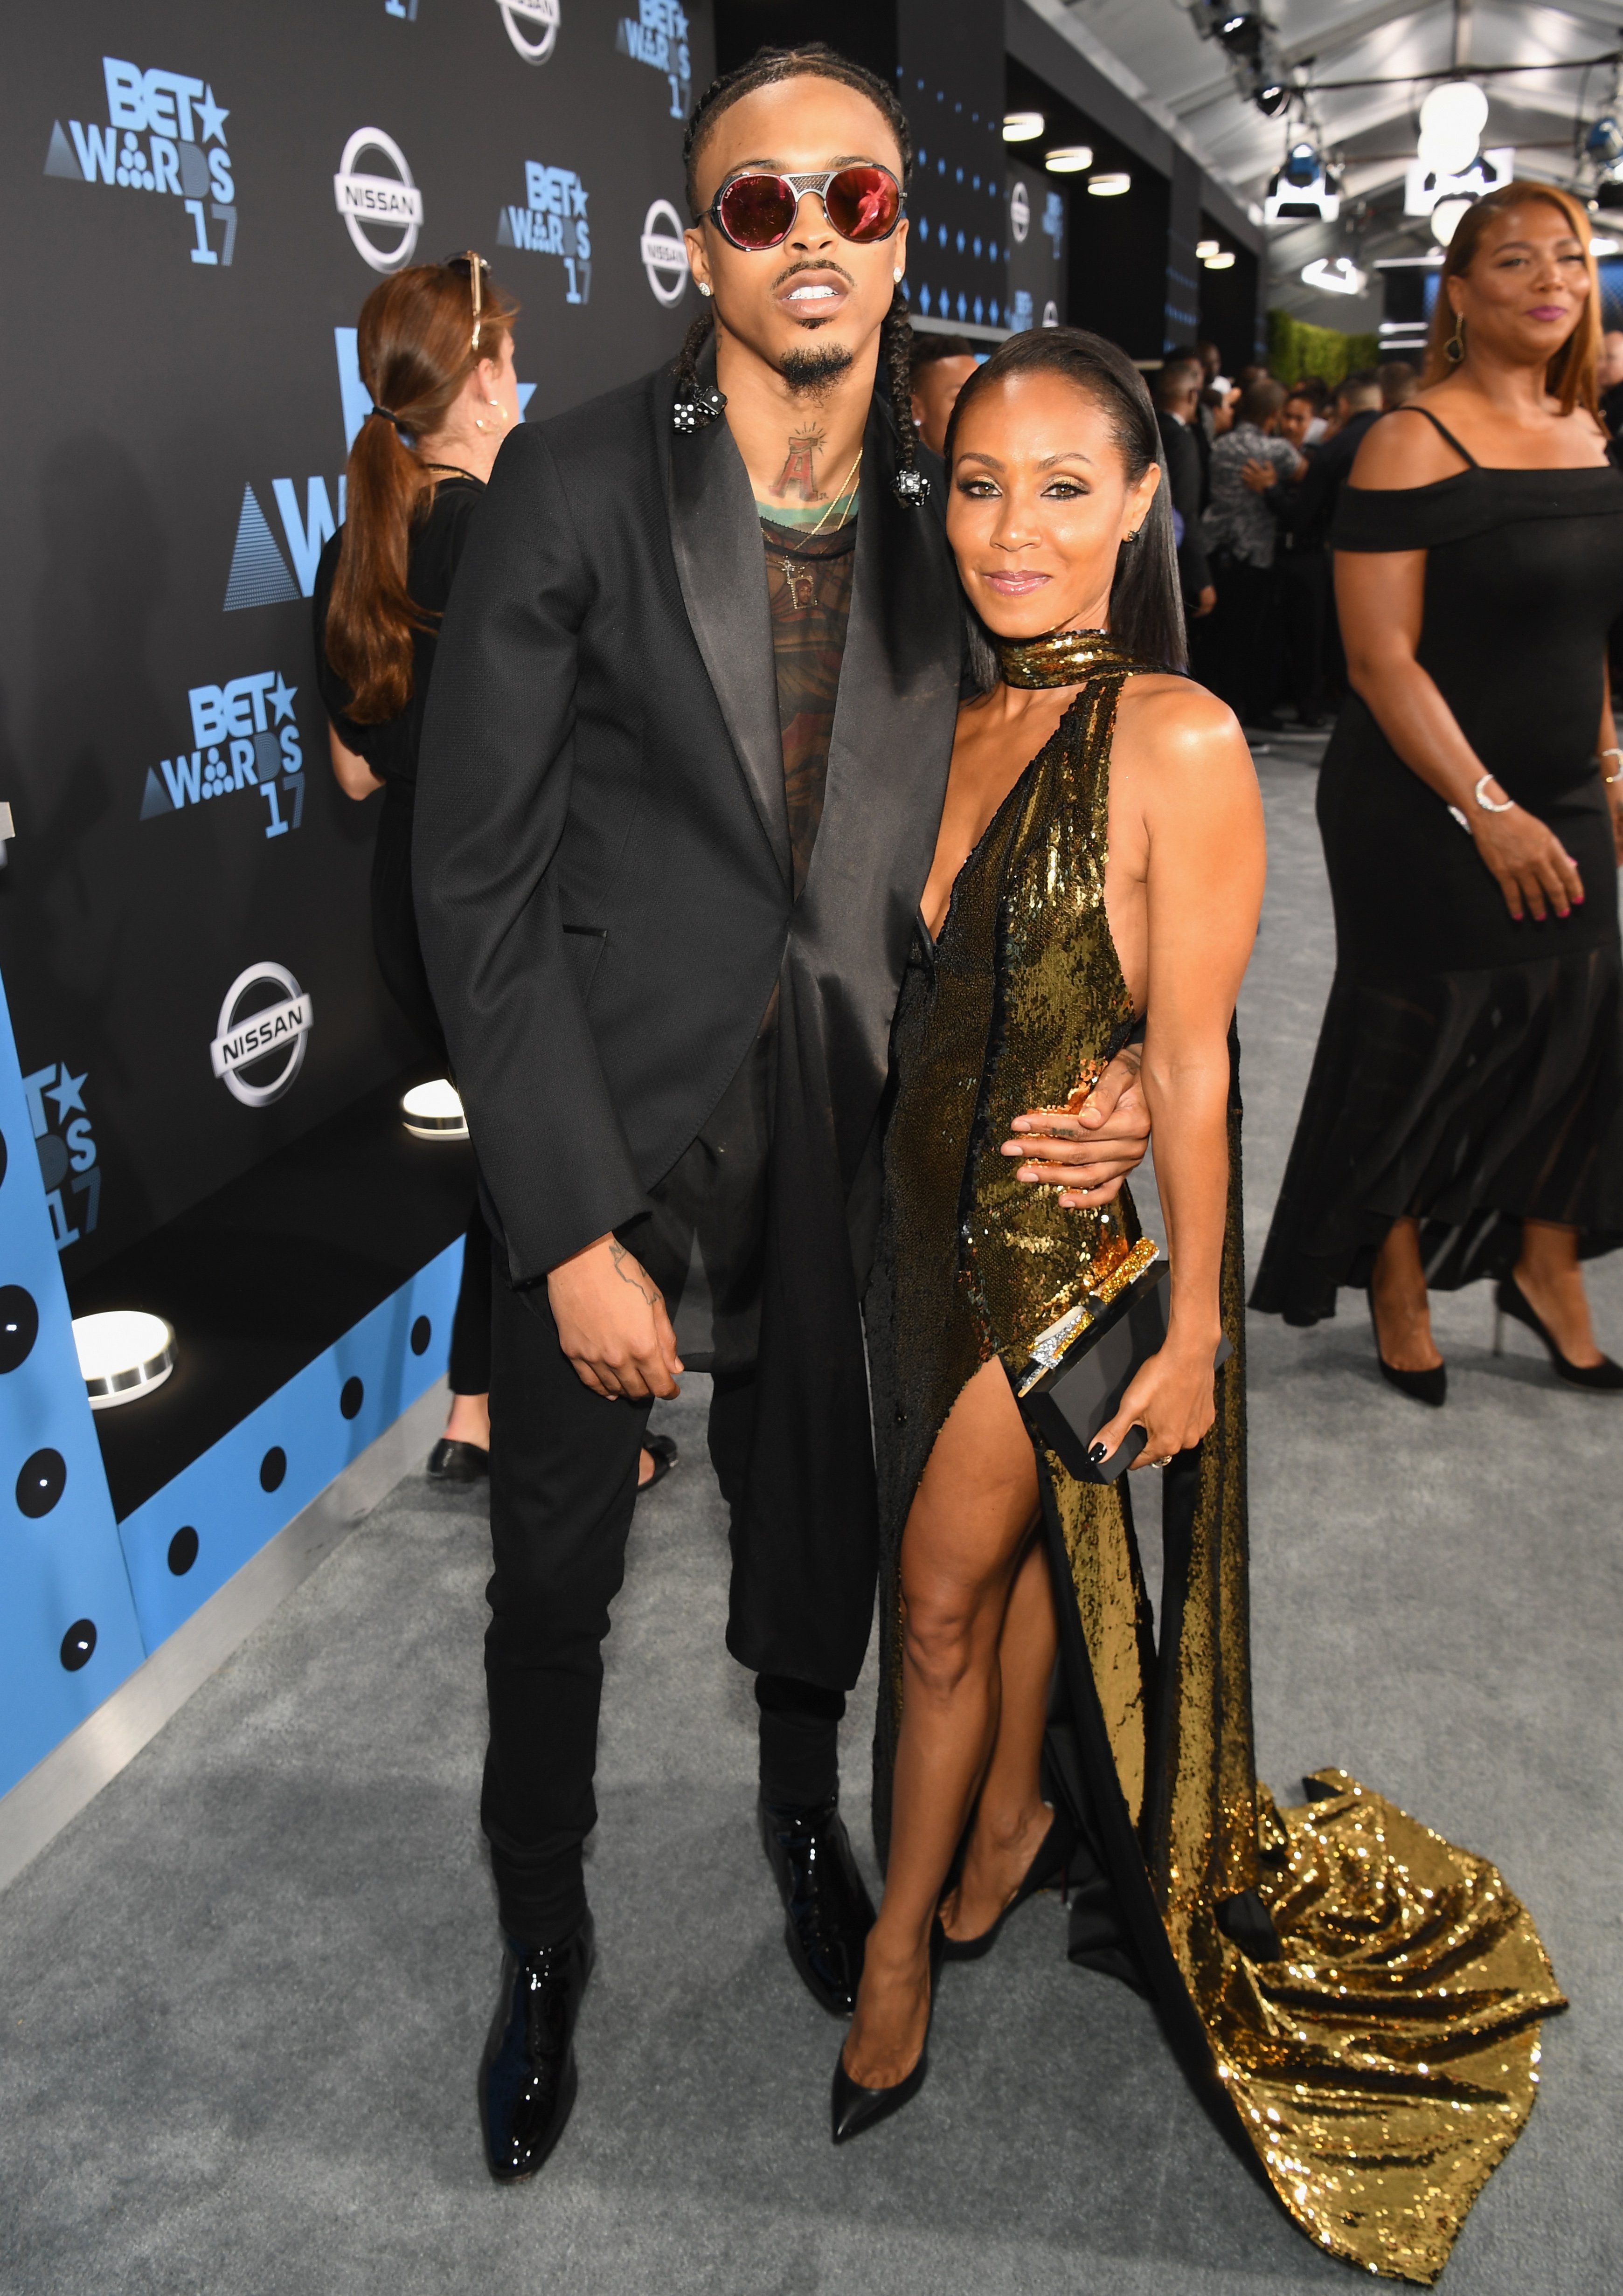 August Alsina and Jada Pinkett Smith at the 2017 BET Awards at Staples Center on June 25, 2017 | Source: Getty Images